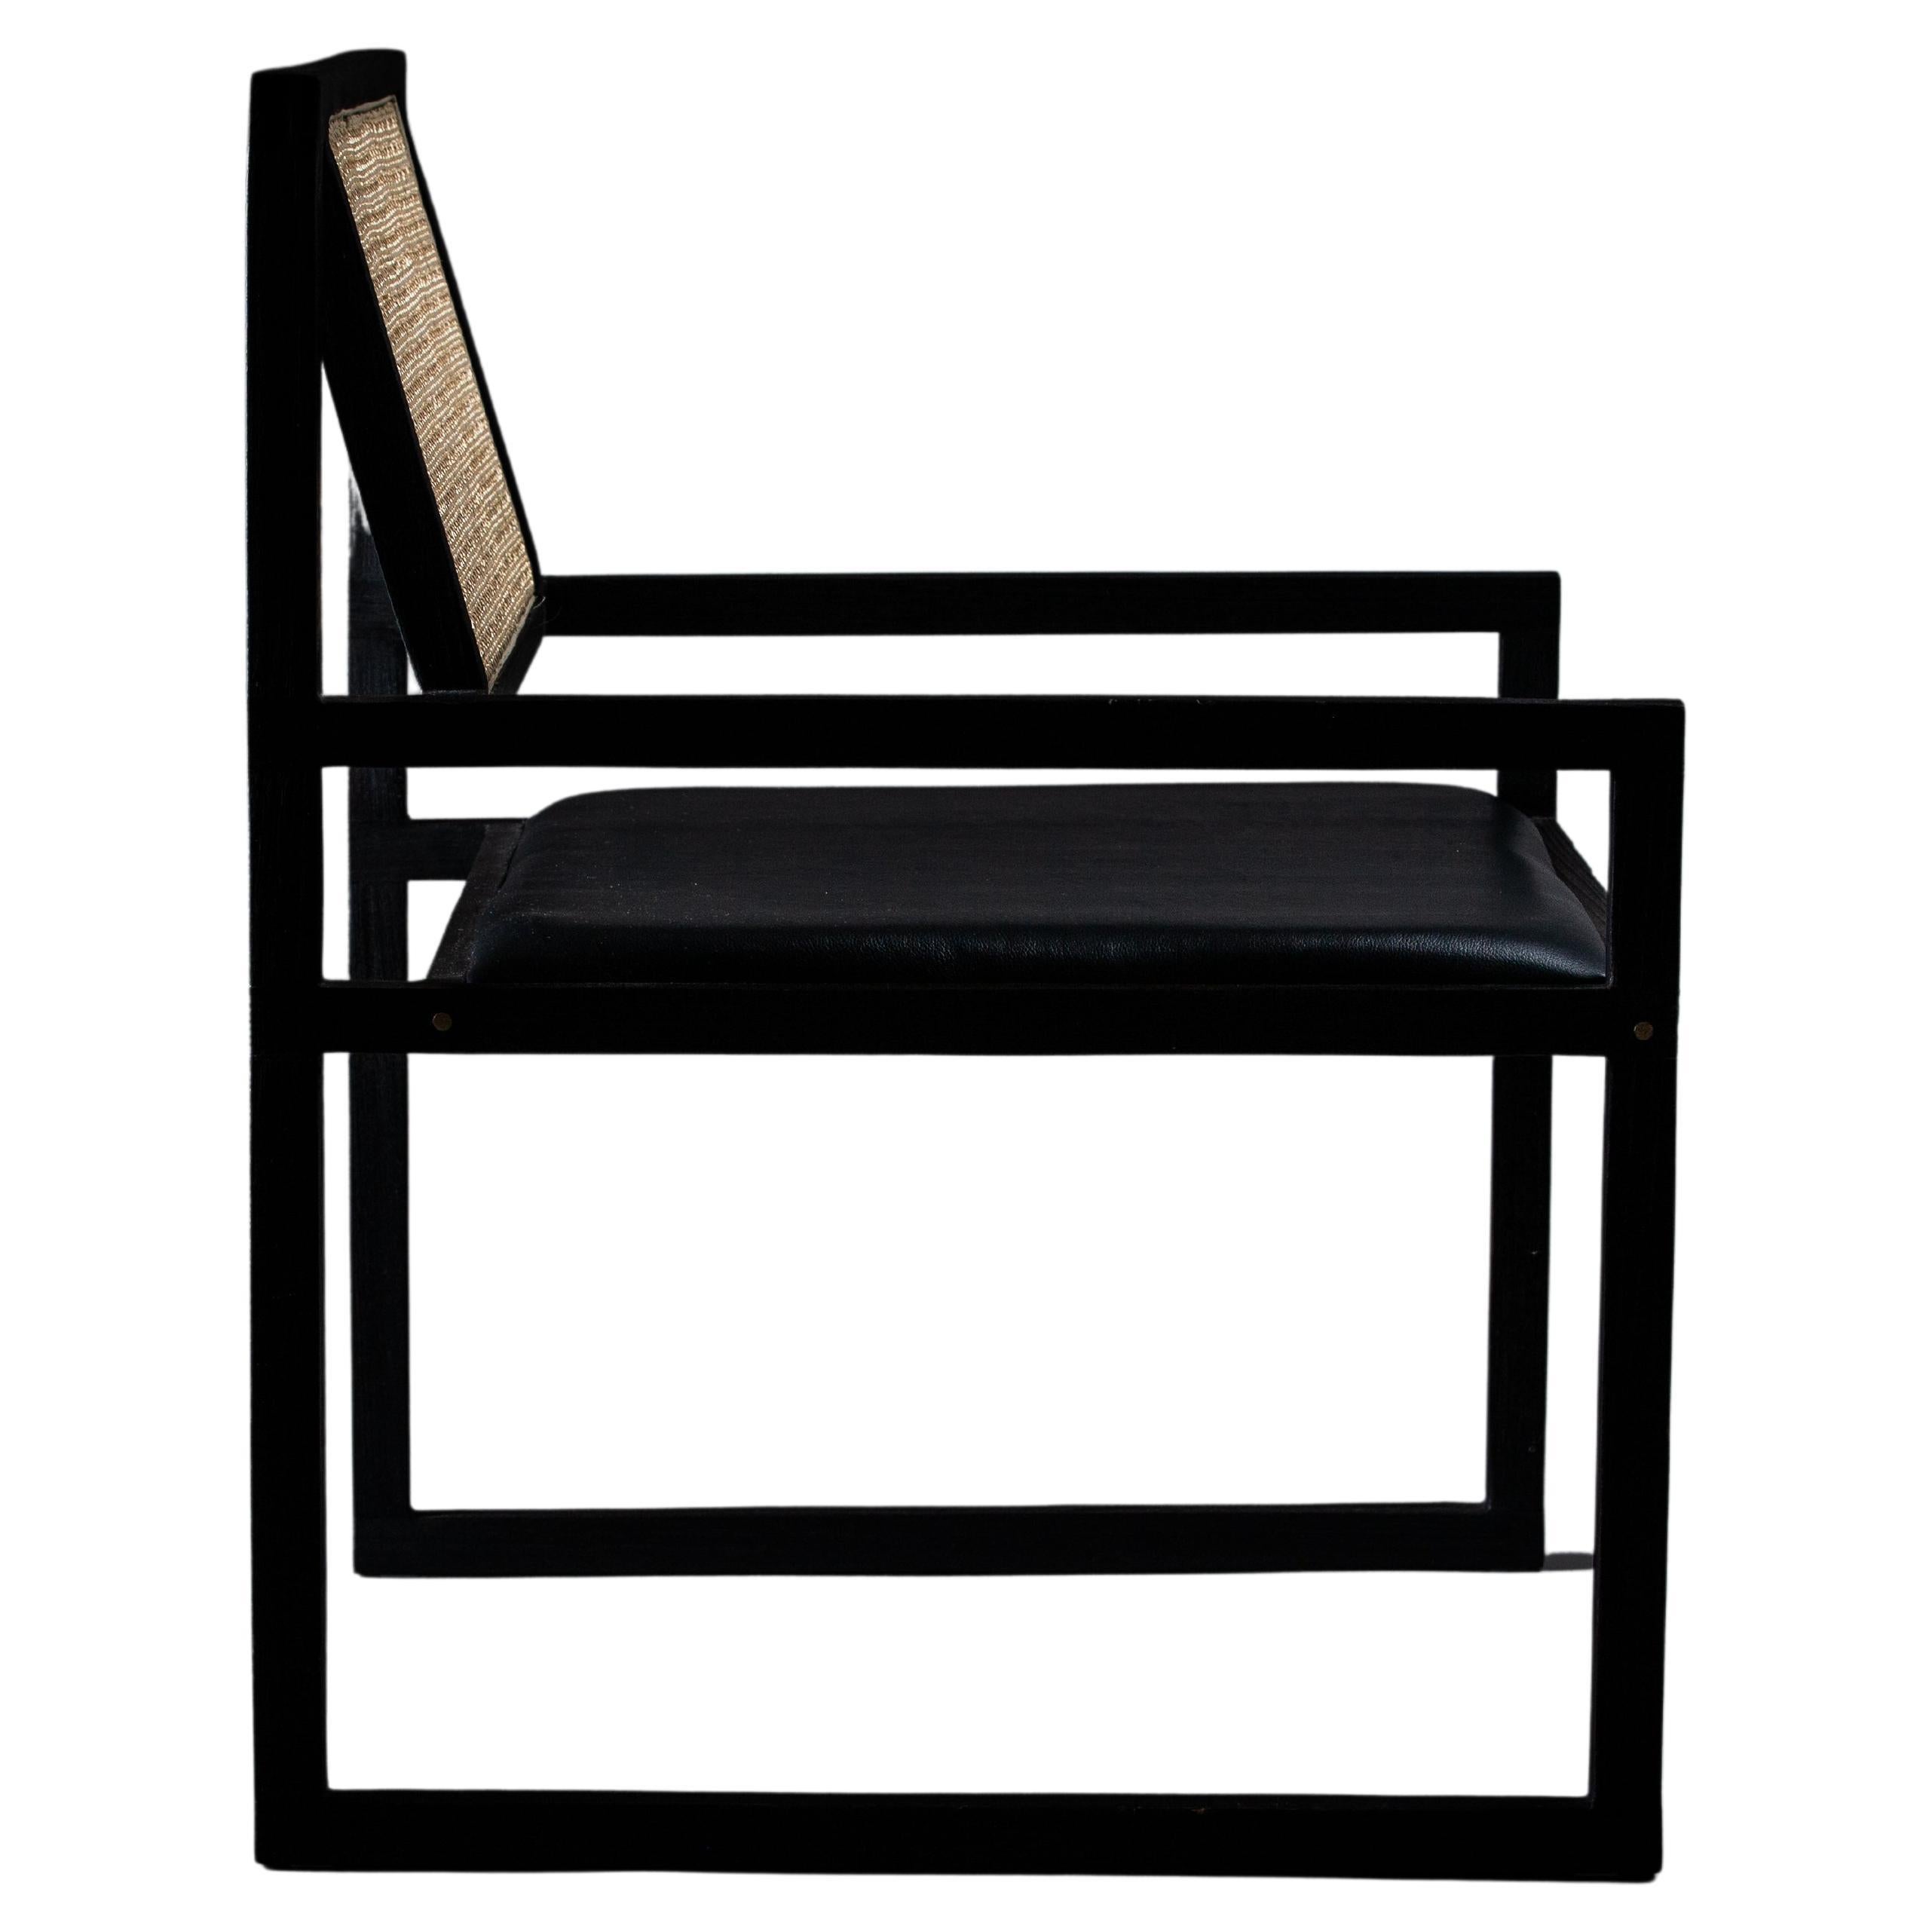 Charred using the Japanese technique shou sugi ban, it's a light and airy piece with straight lines and angles. Crafted from Freijó wood, it's exceptionally comfortable and durable, featuring a foam-padded seat upholstered in genuine leather and a